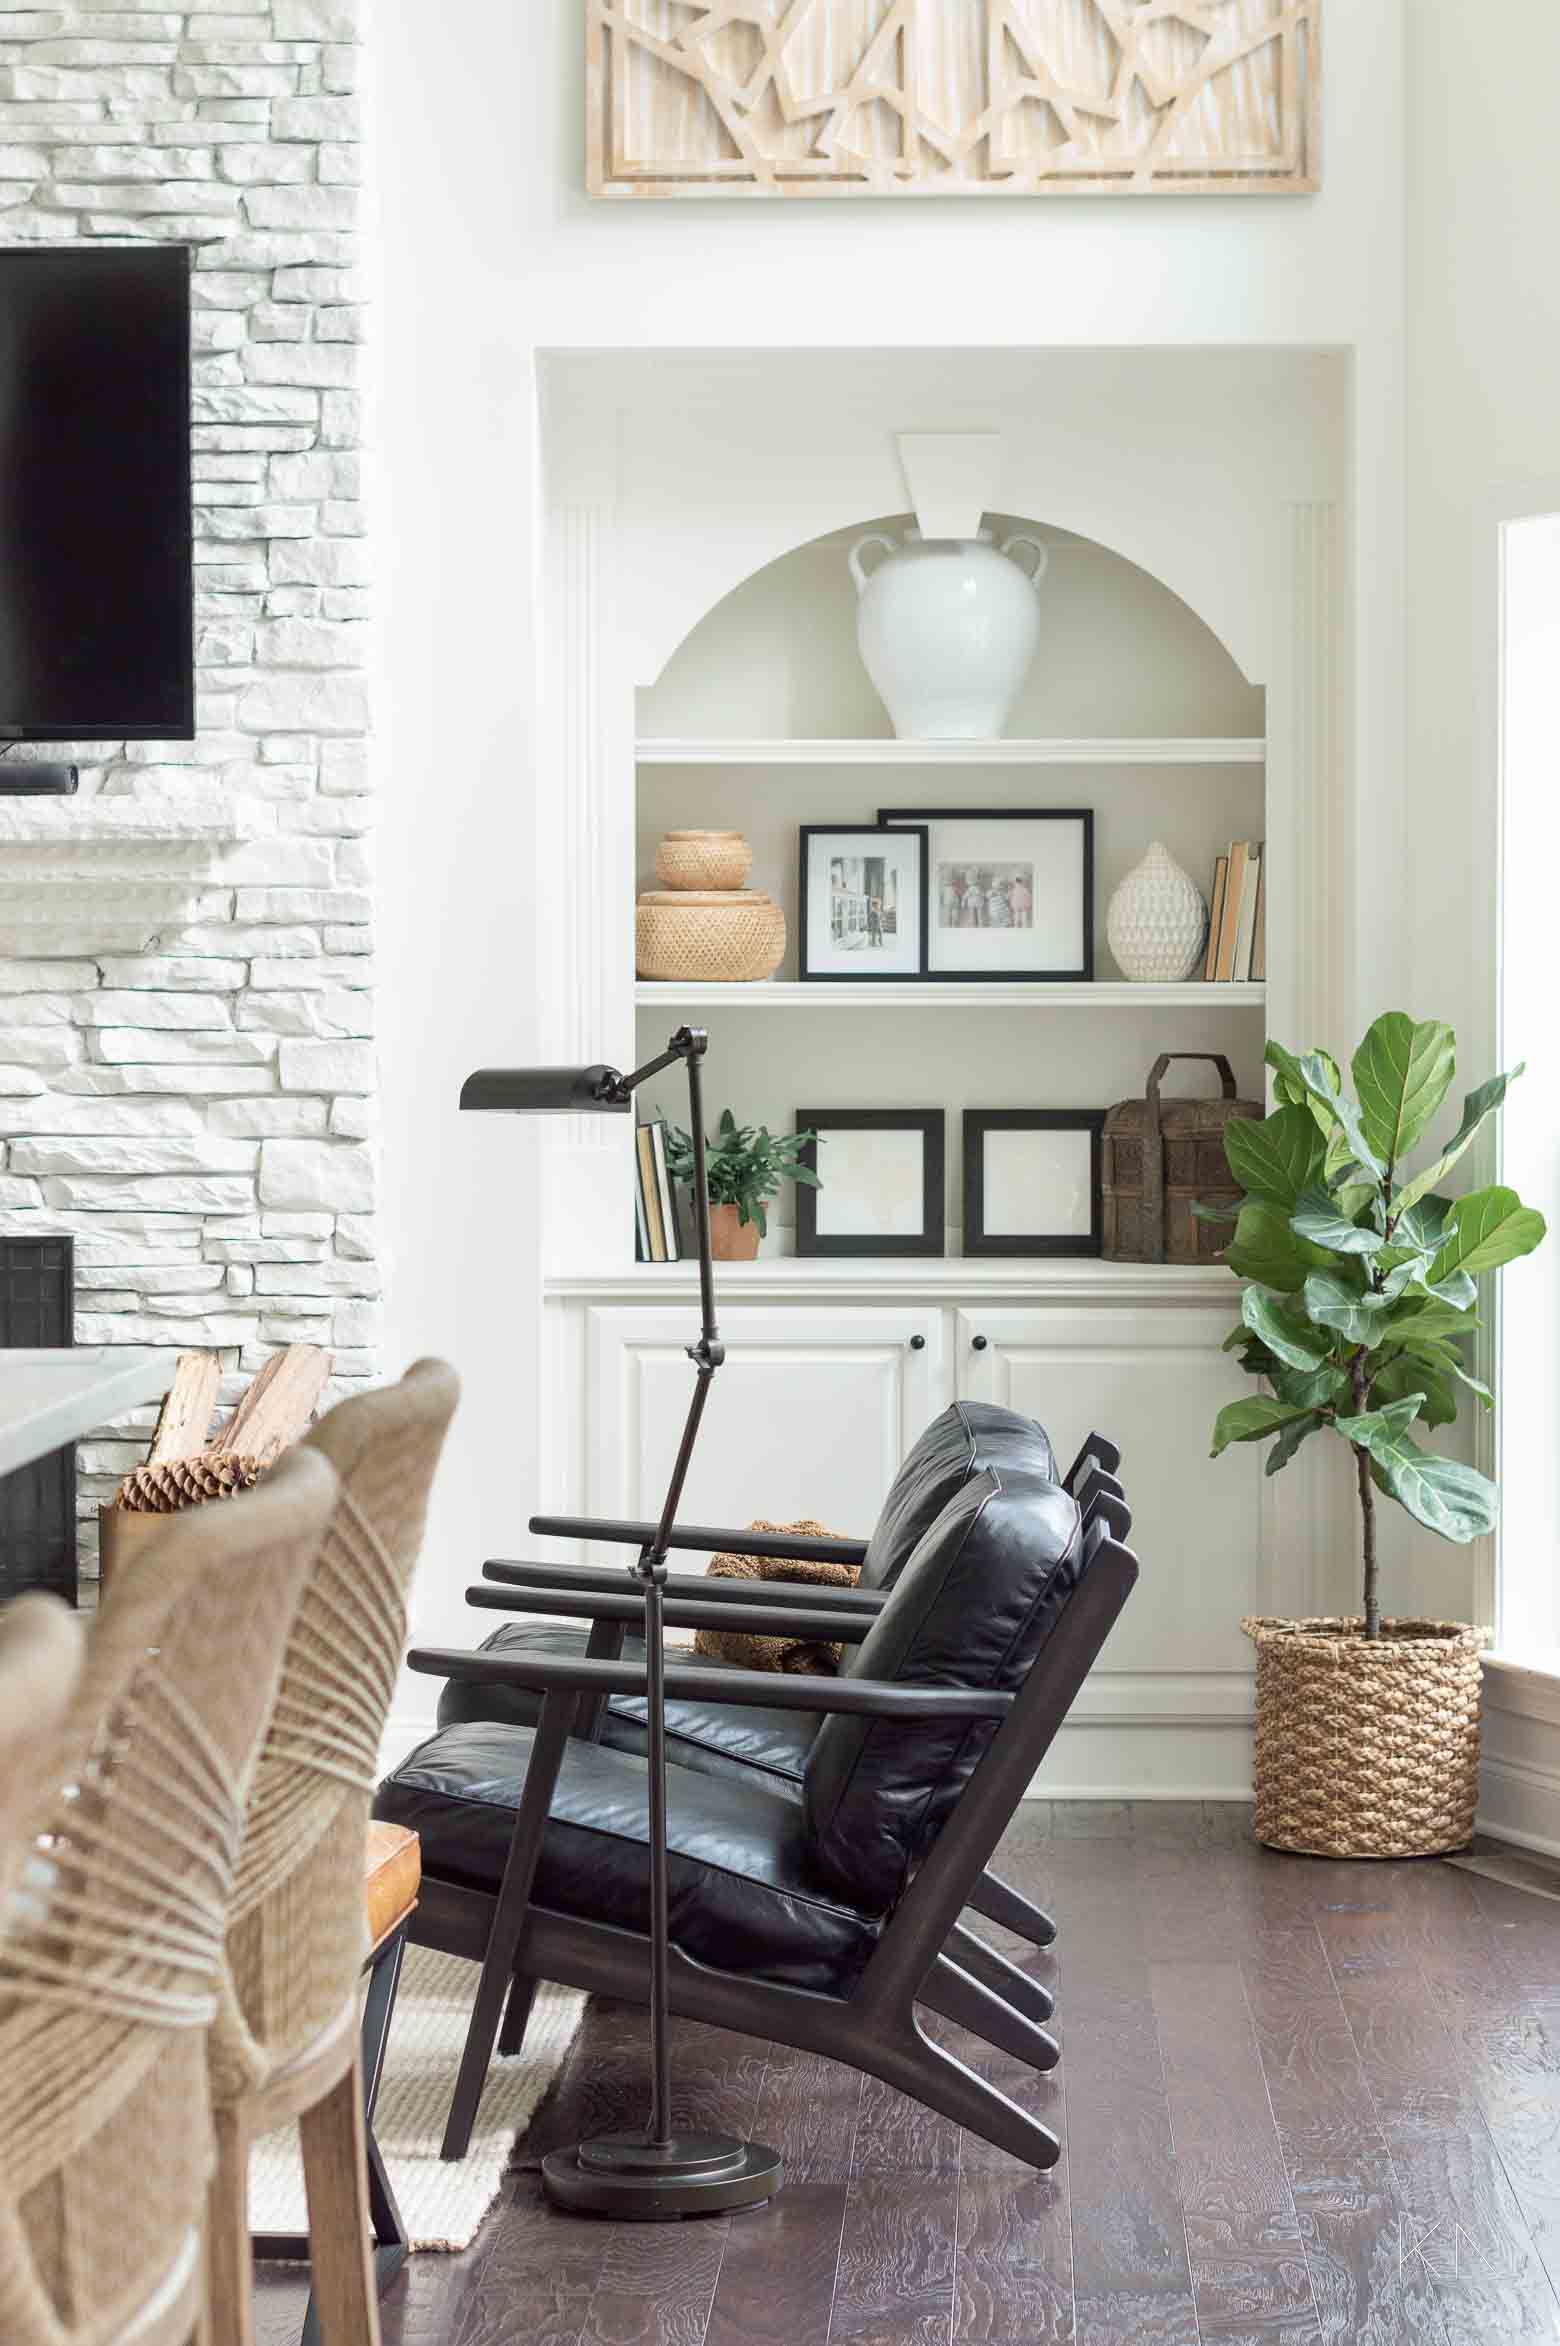 13 Tips for Achieving a More Minimalistic Living Room (When You Aren't a Minimalist)